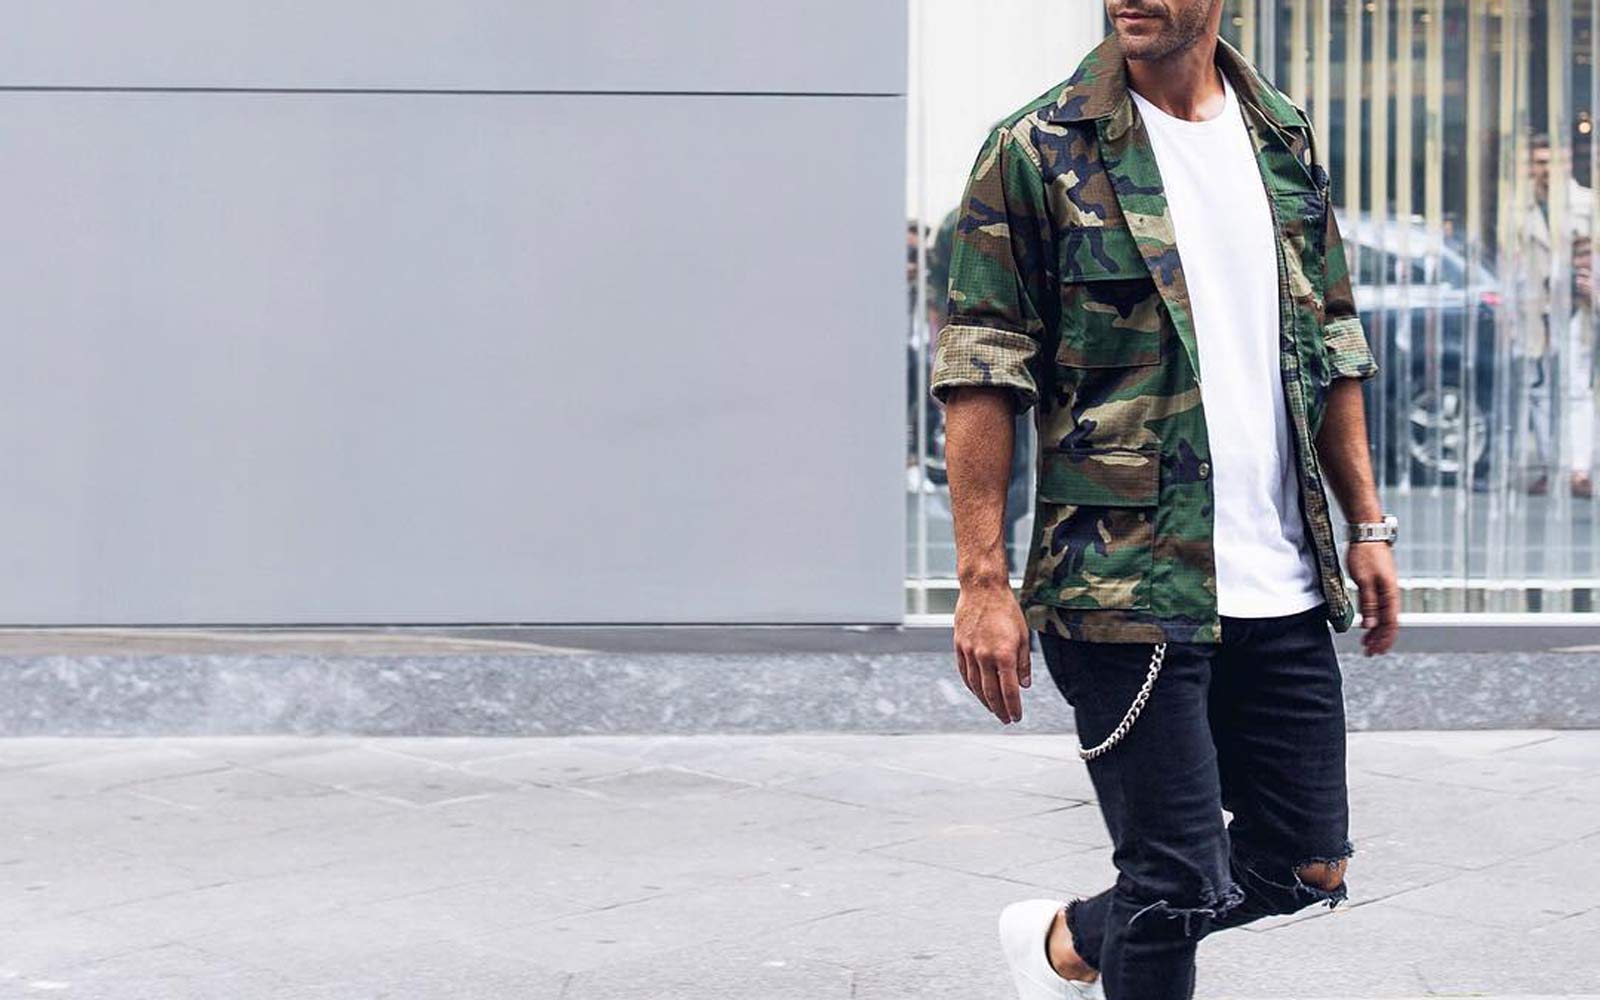 men's outfits with camo pants